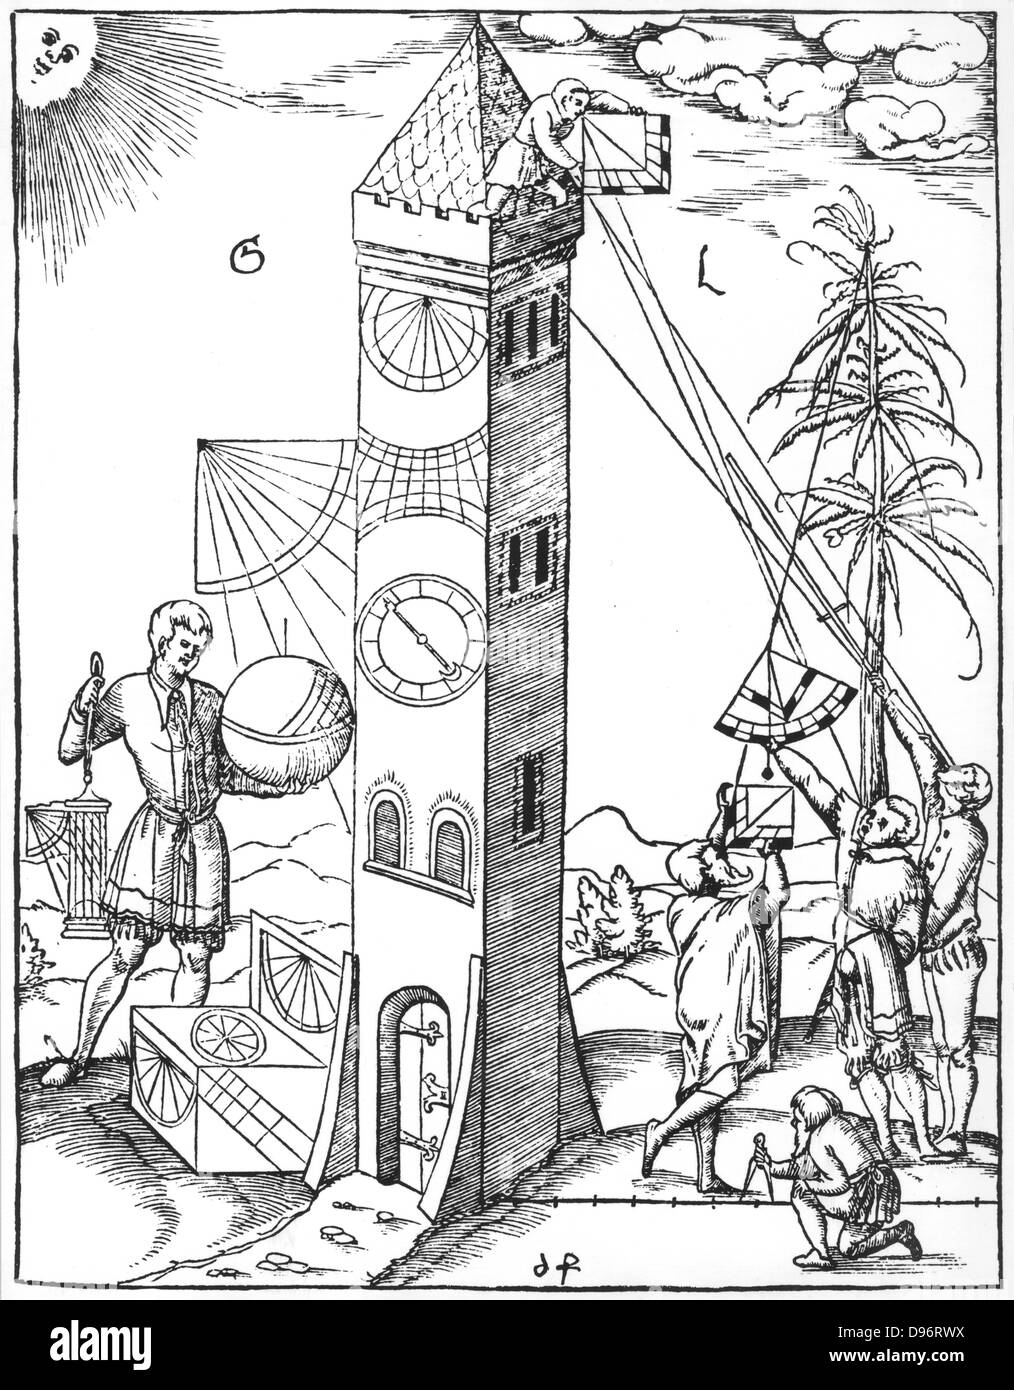 Methods of surveying (right) and time keeping (left). On the left are various different kinds of sundials and a clock with a single arm. On the right a survey is being made of the height of the tower, using quadrants and, on the far right, a cross staff. From Sebastian Munster 'Rudimenta Mathematica', Basle, 1551. Woodcut. Stock Photo